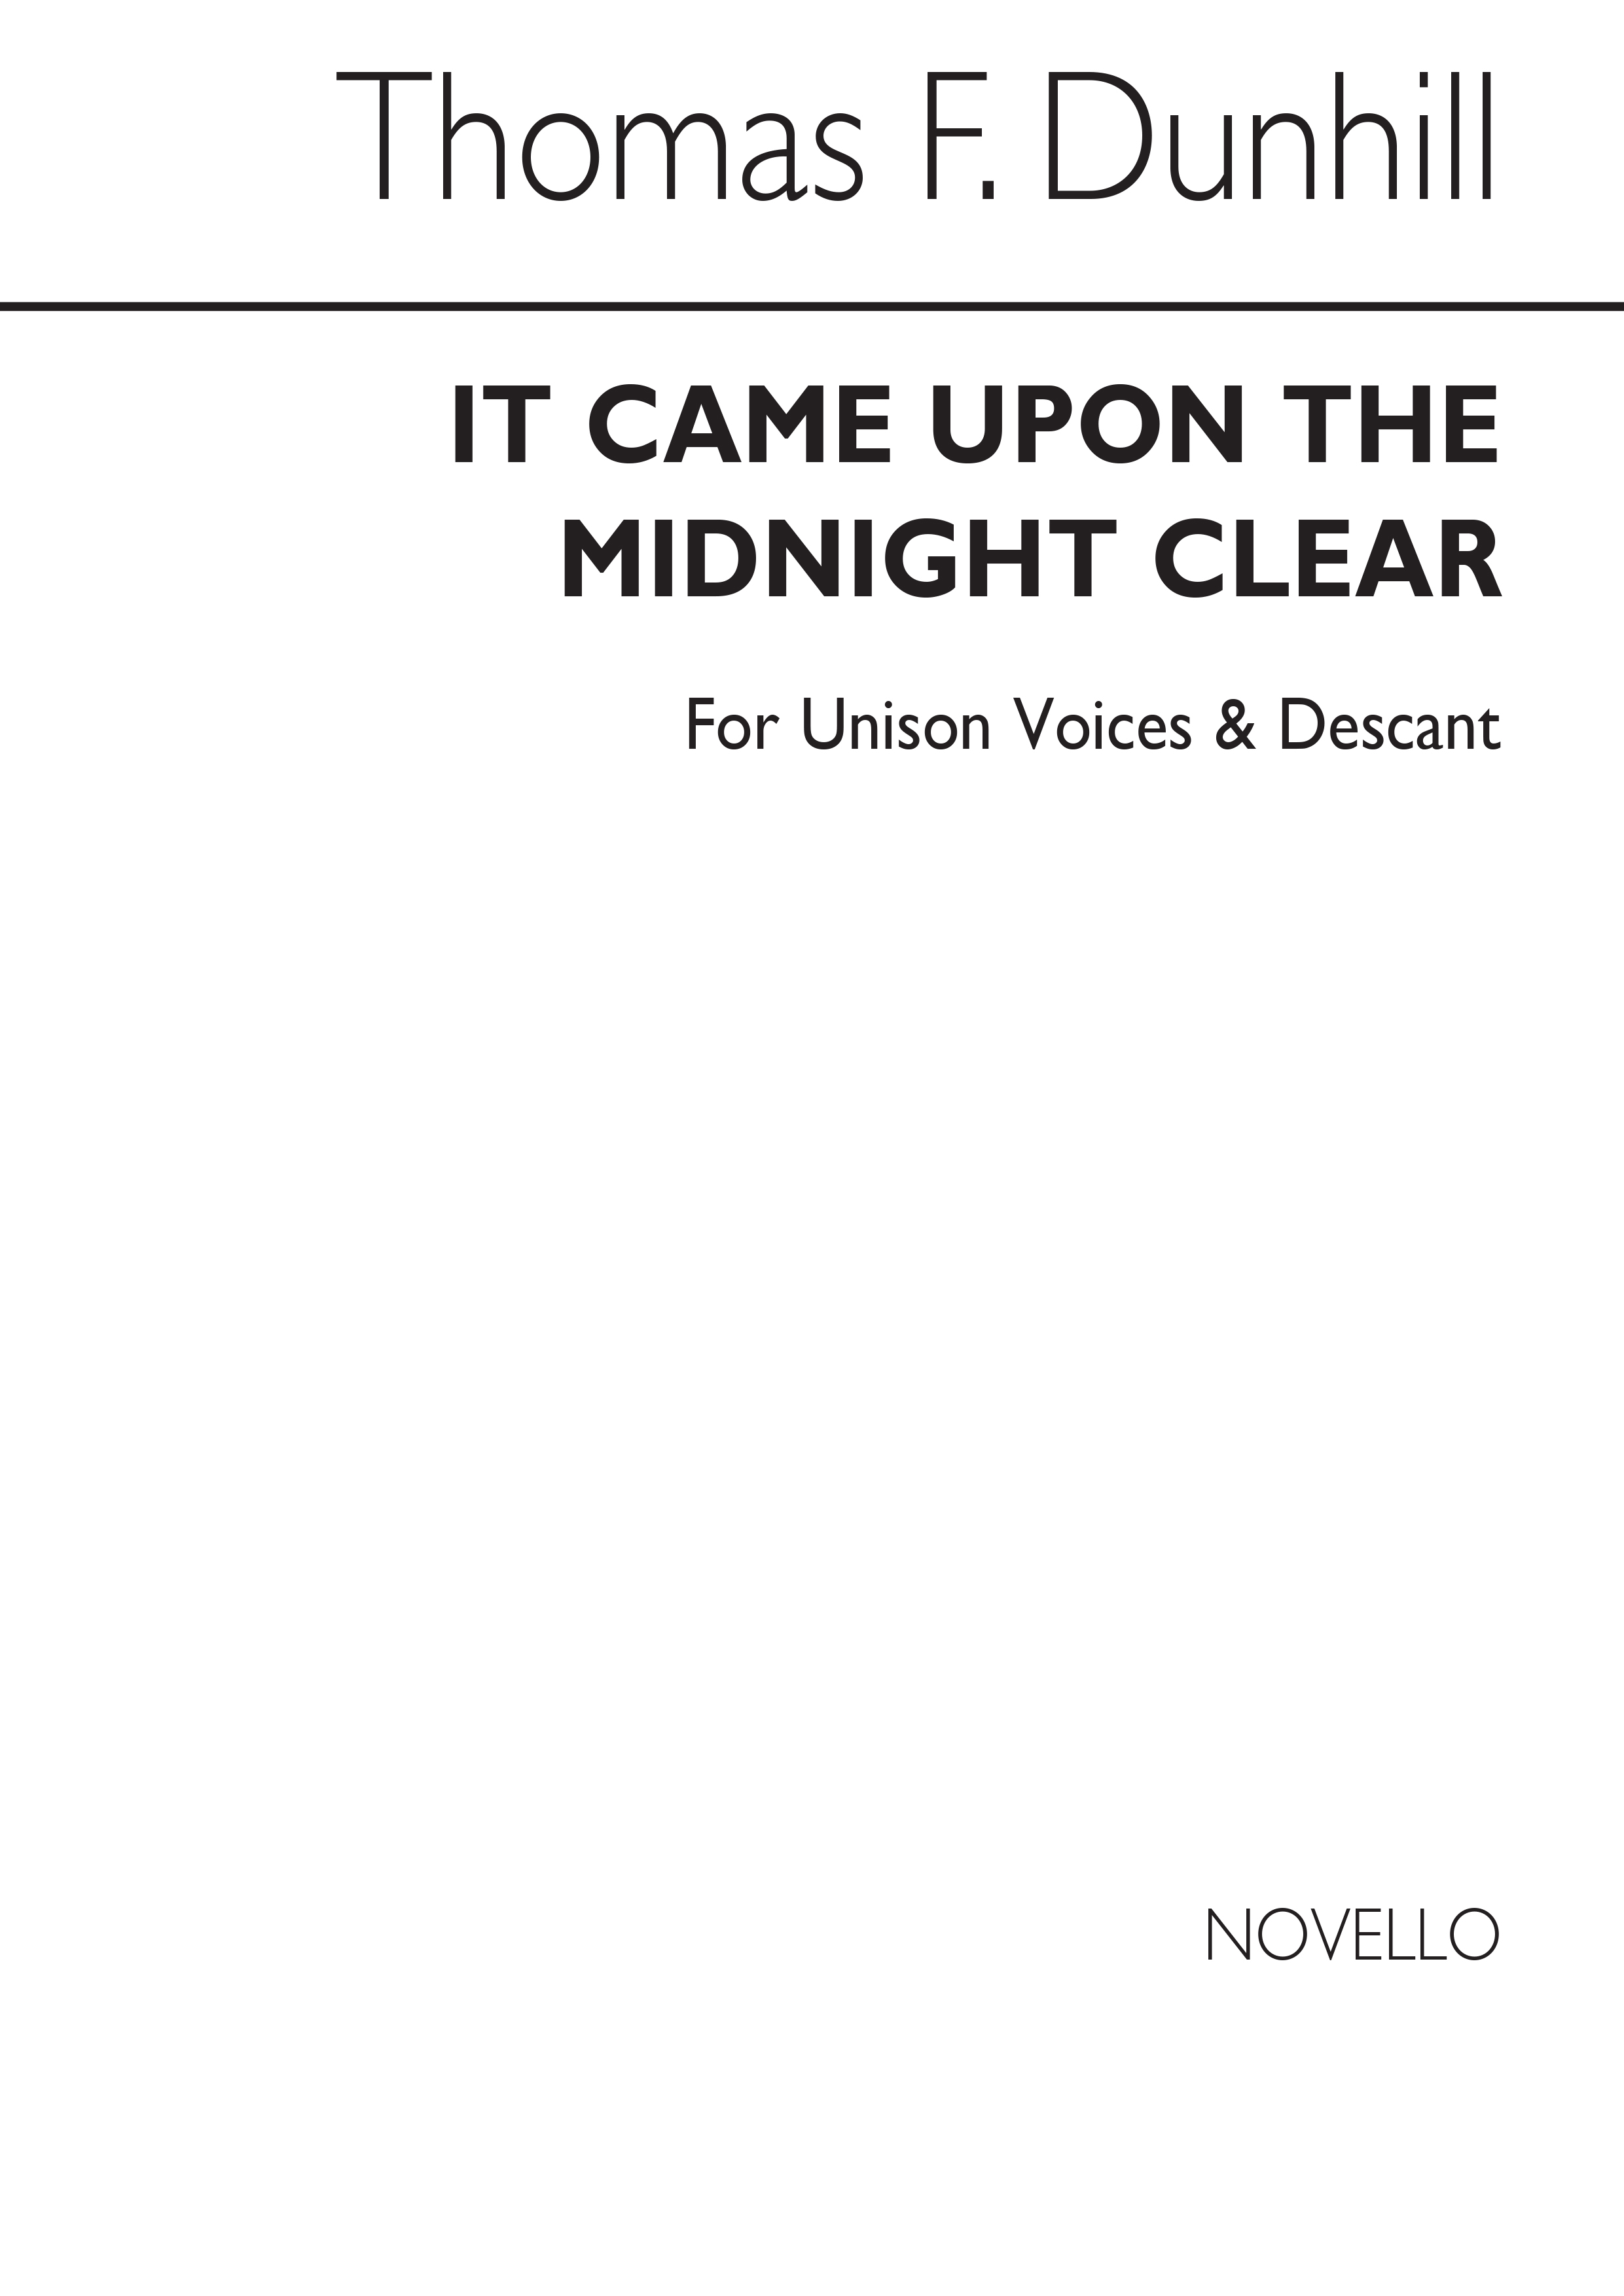 Dunhill: It Came Upon Midnight for Unison Voices and Descant